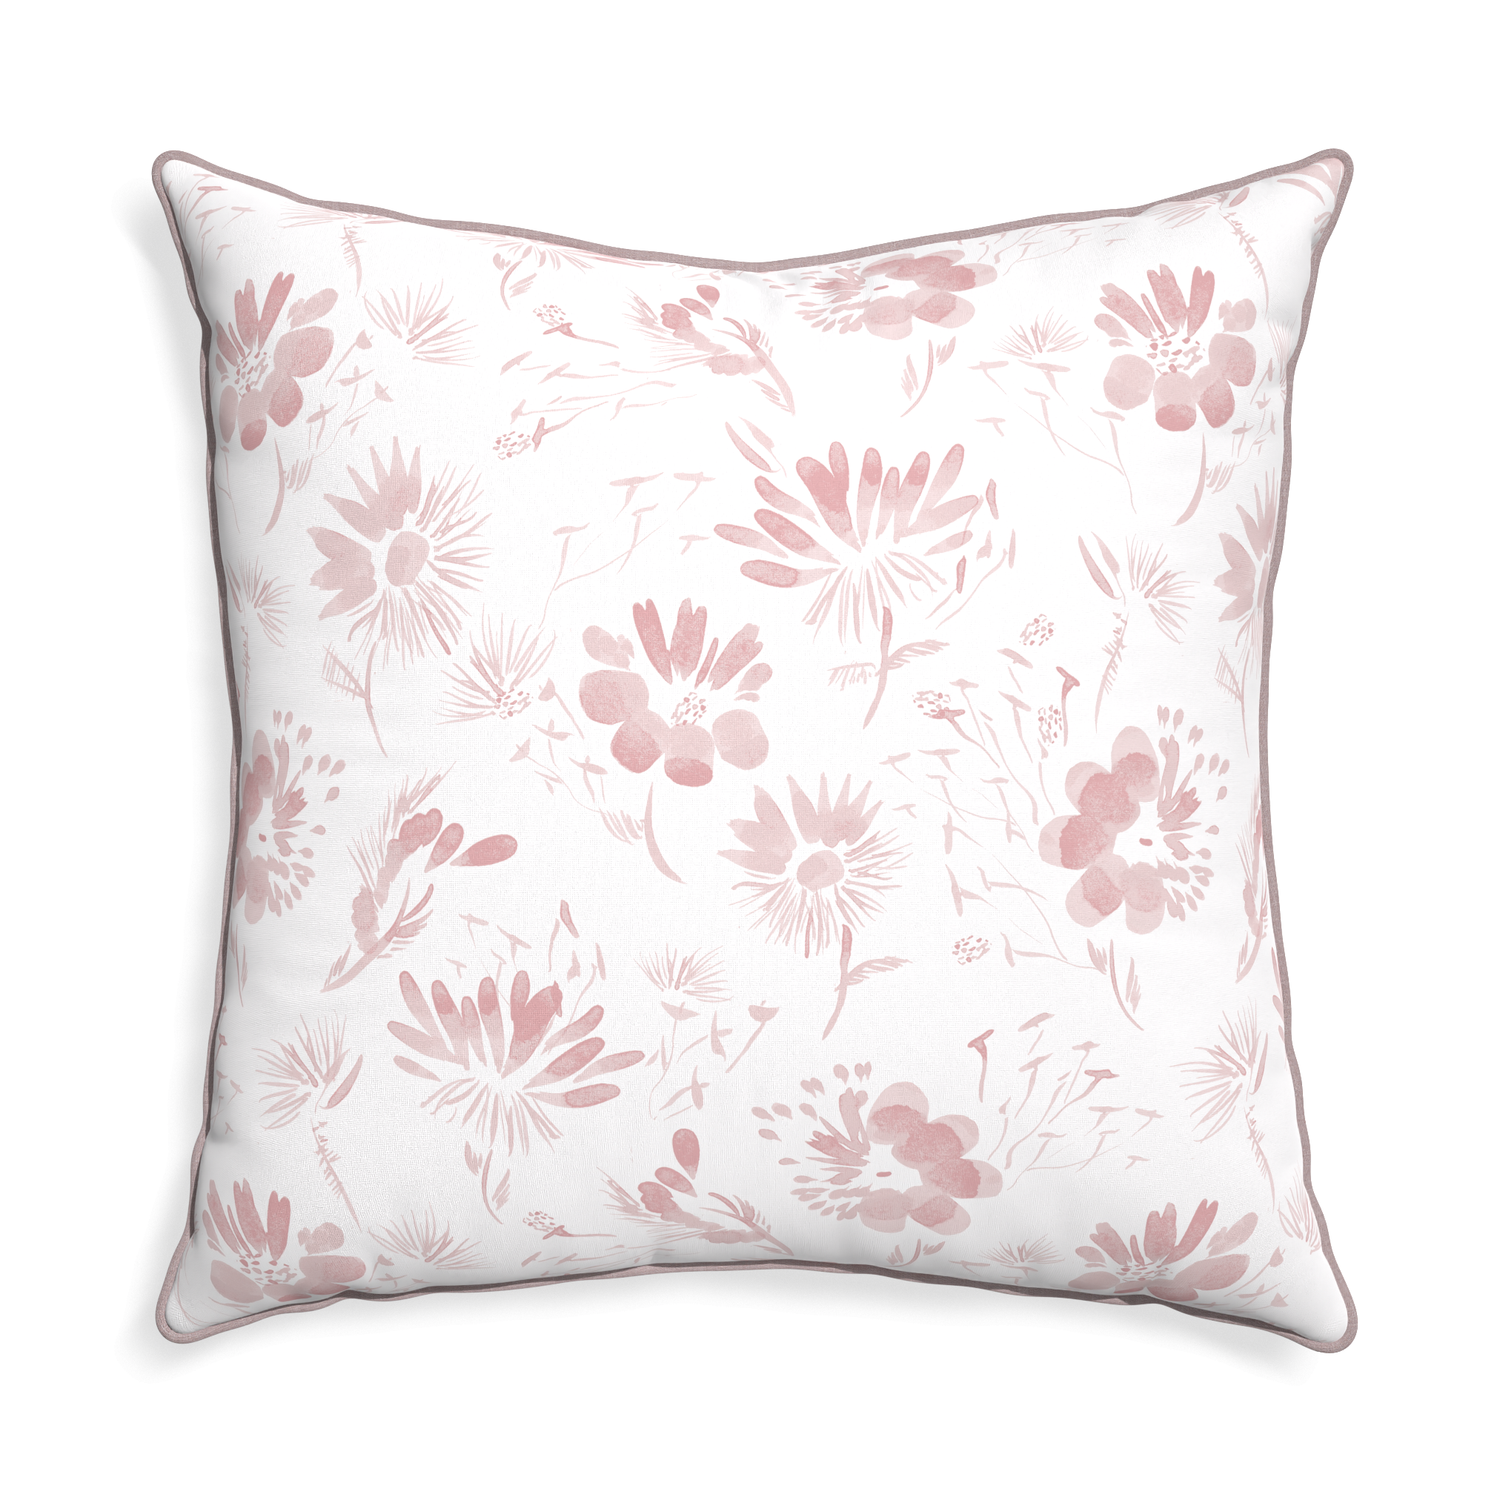 Euro-sham blake custom pink floralpillow with orchid piping on white background